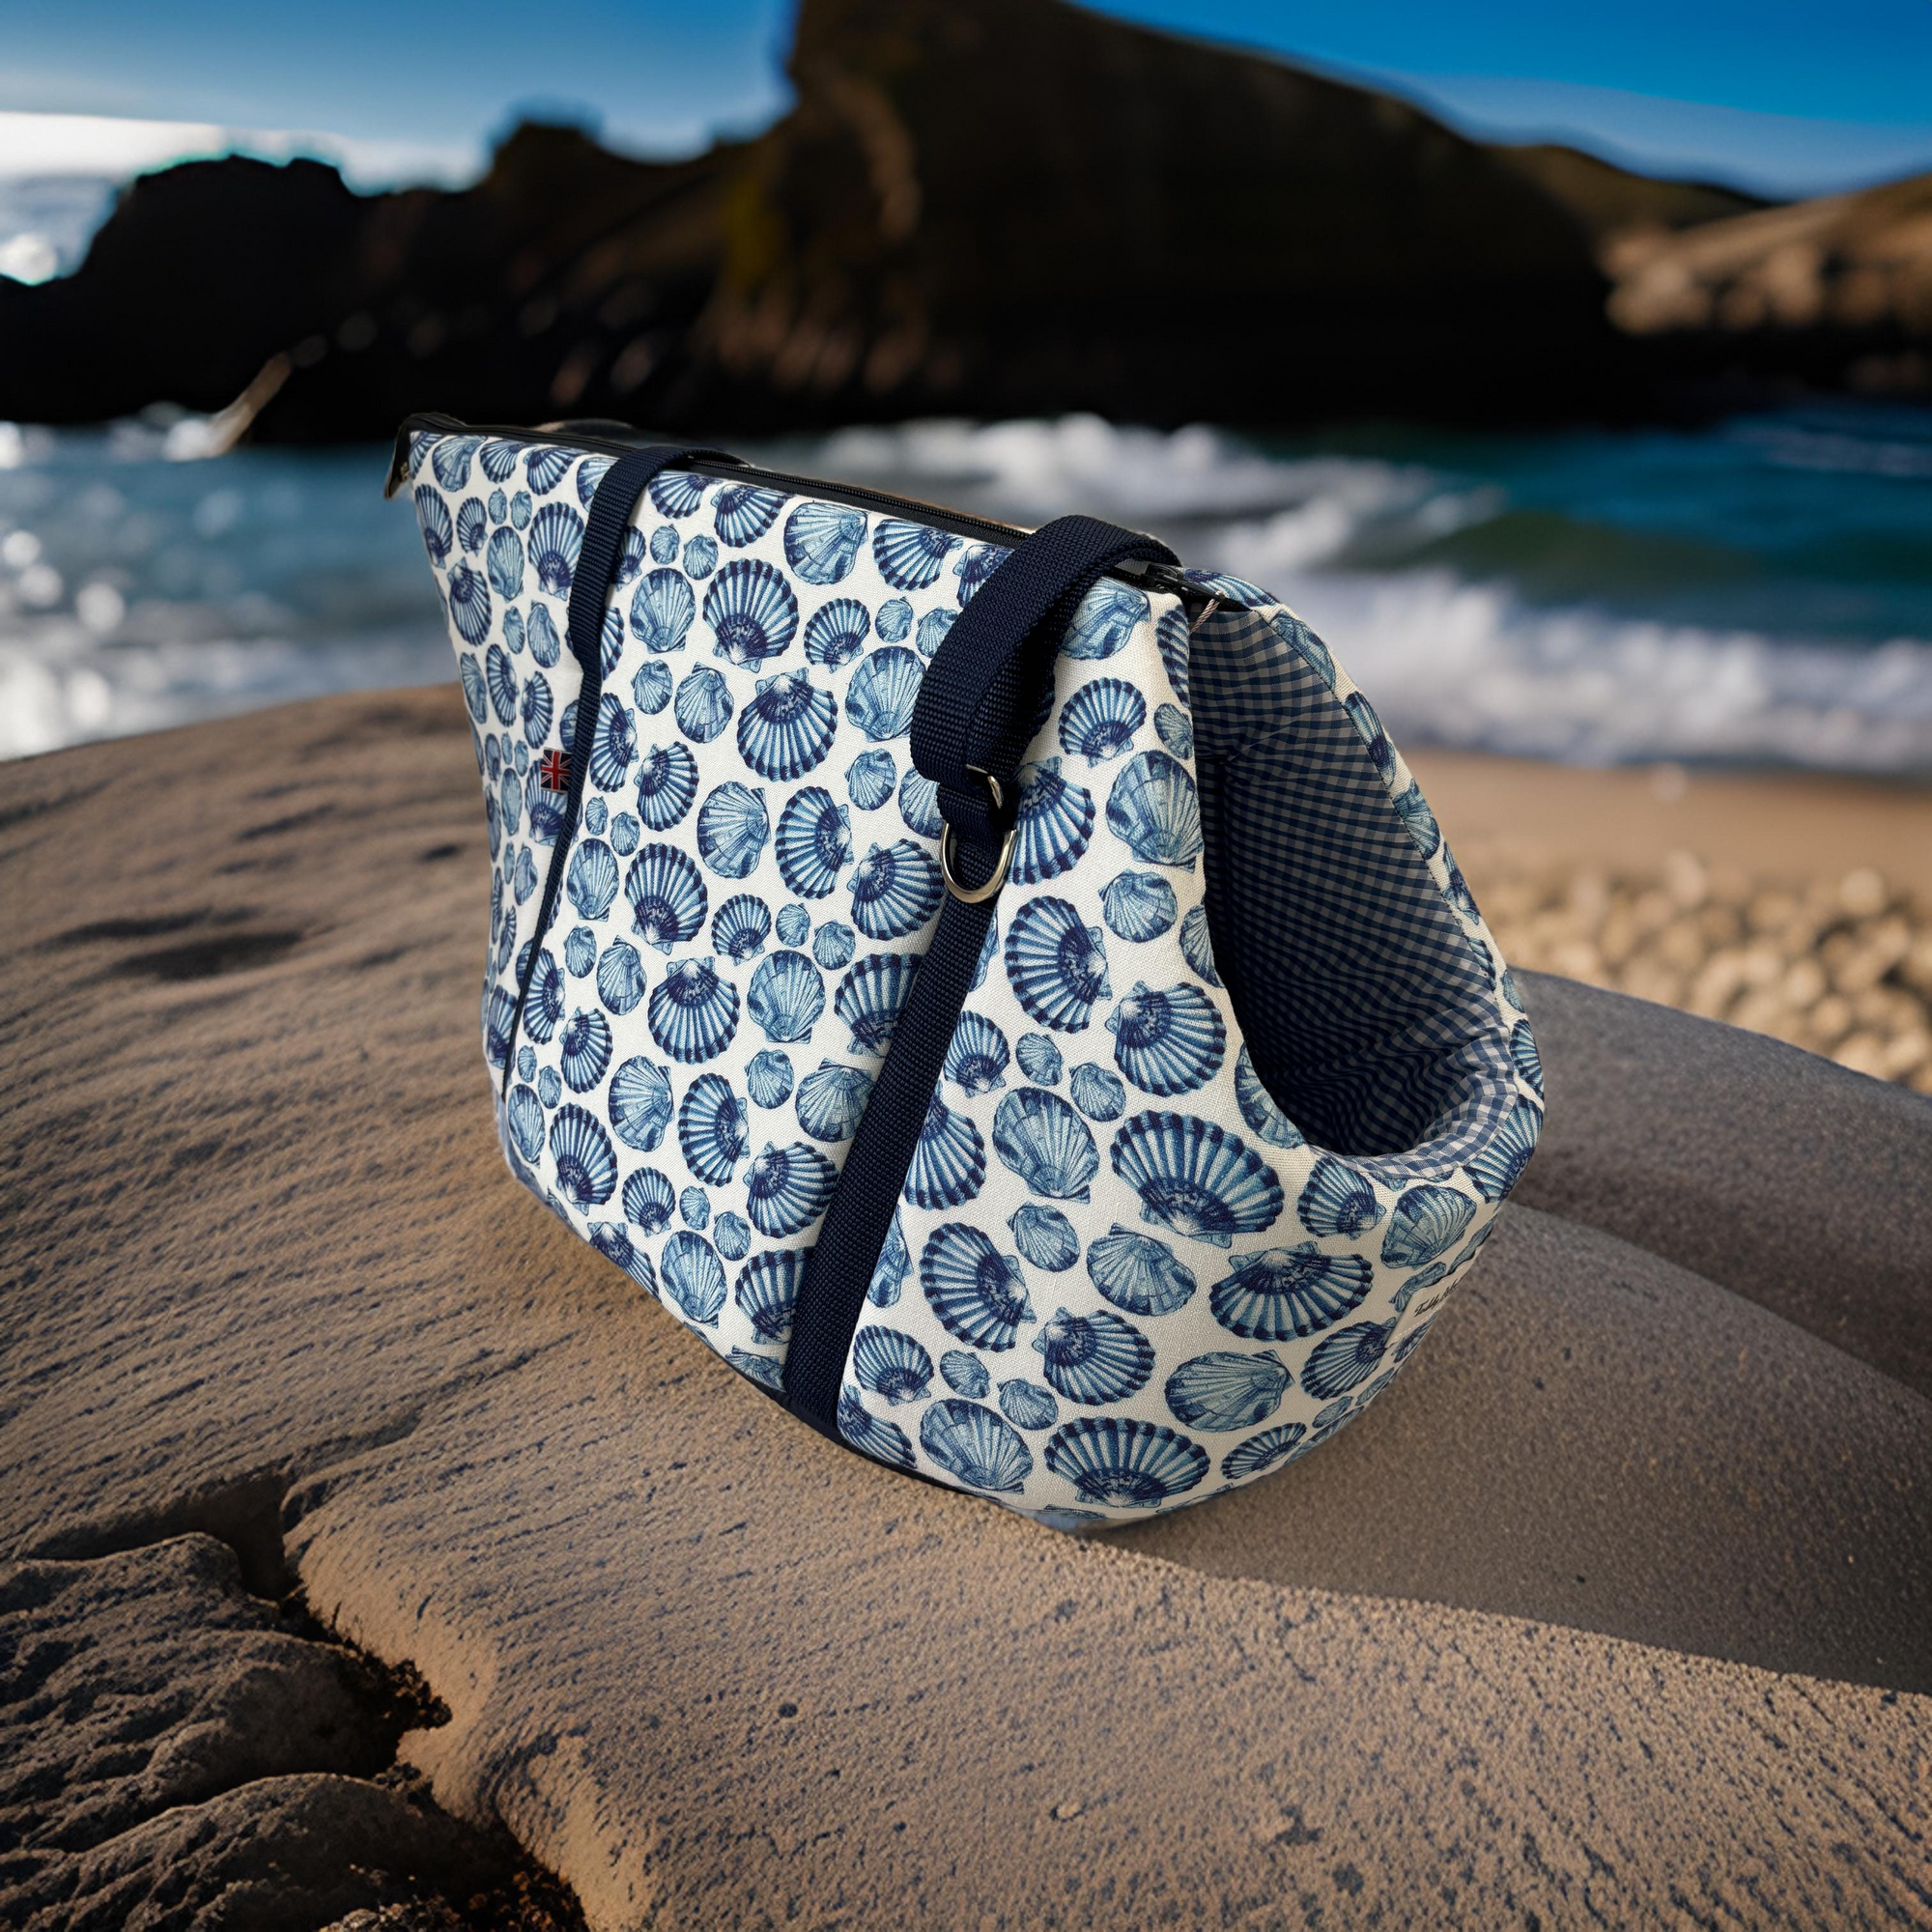 Meet 'The Cornwall' - a Stylish Dog Bag for Your Next Adventure!